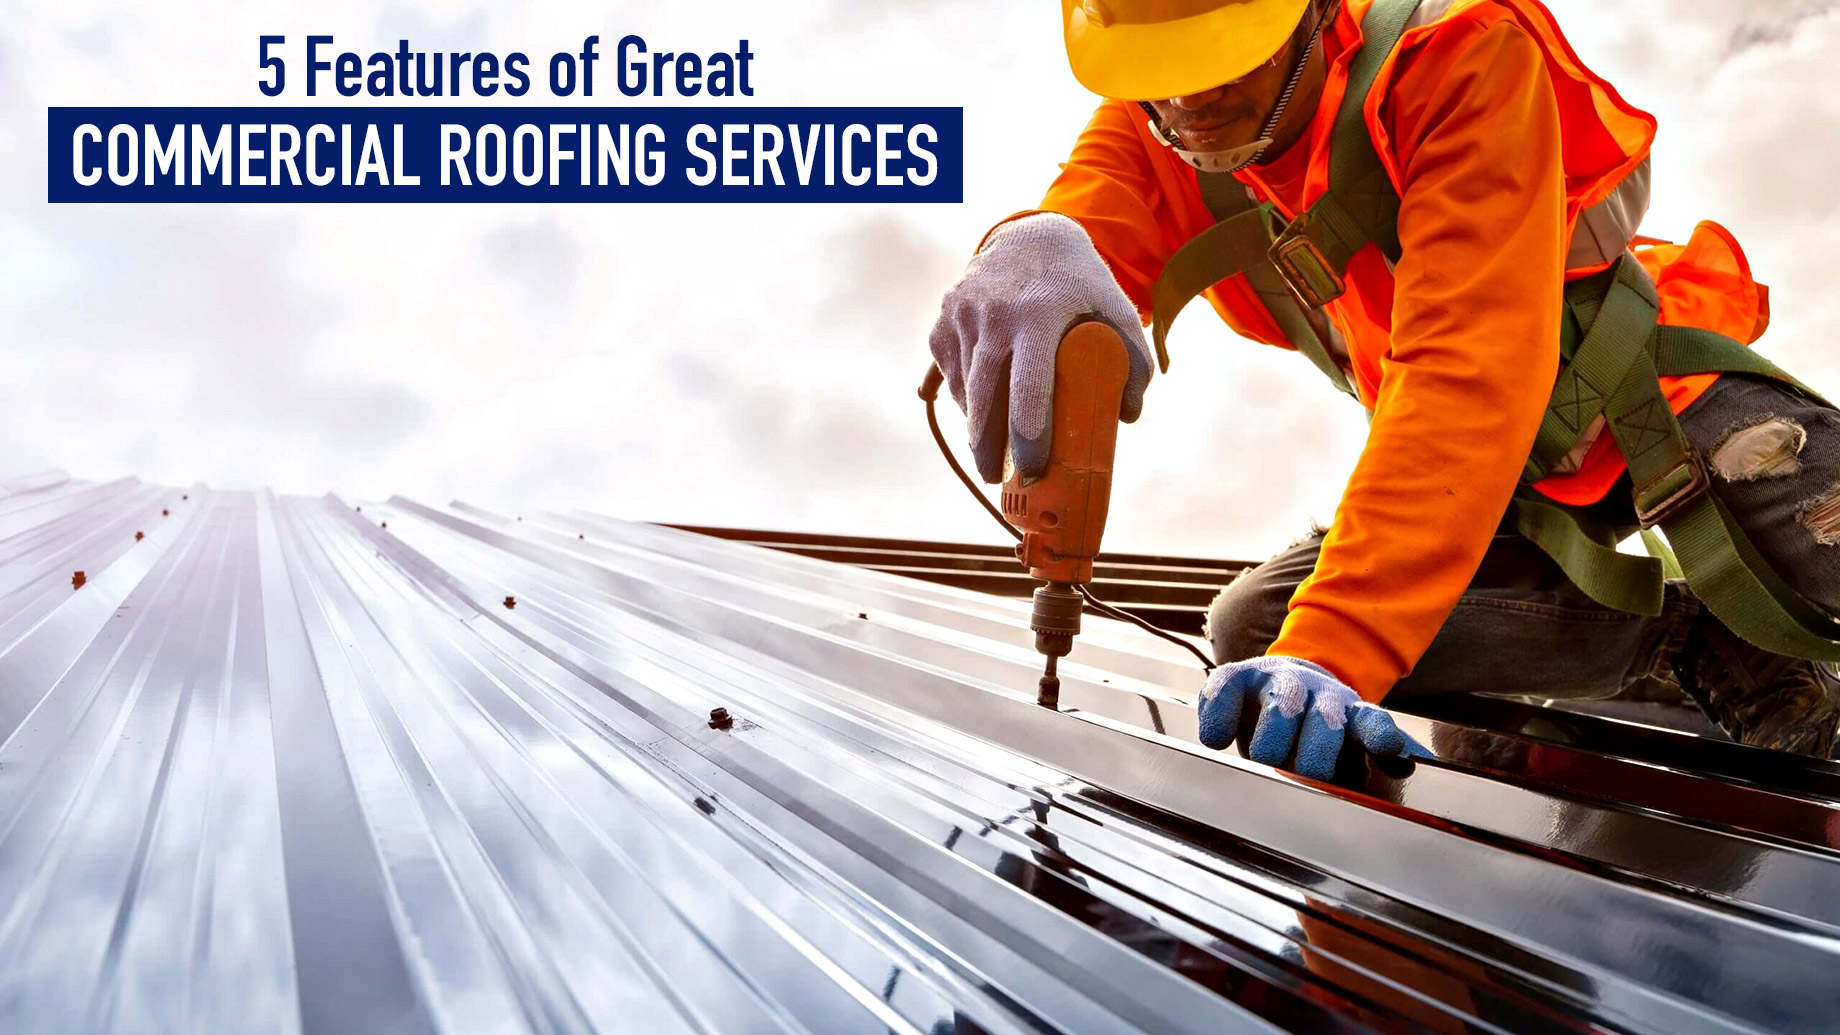 5 Features of Great Commercial Roofing Services